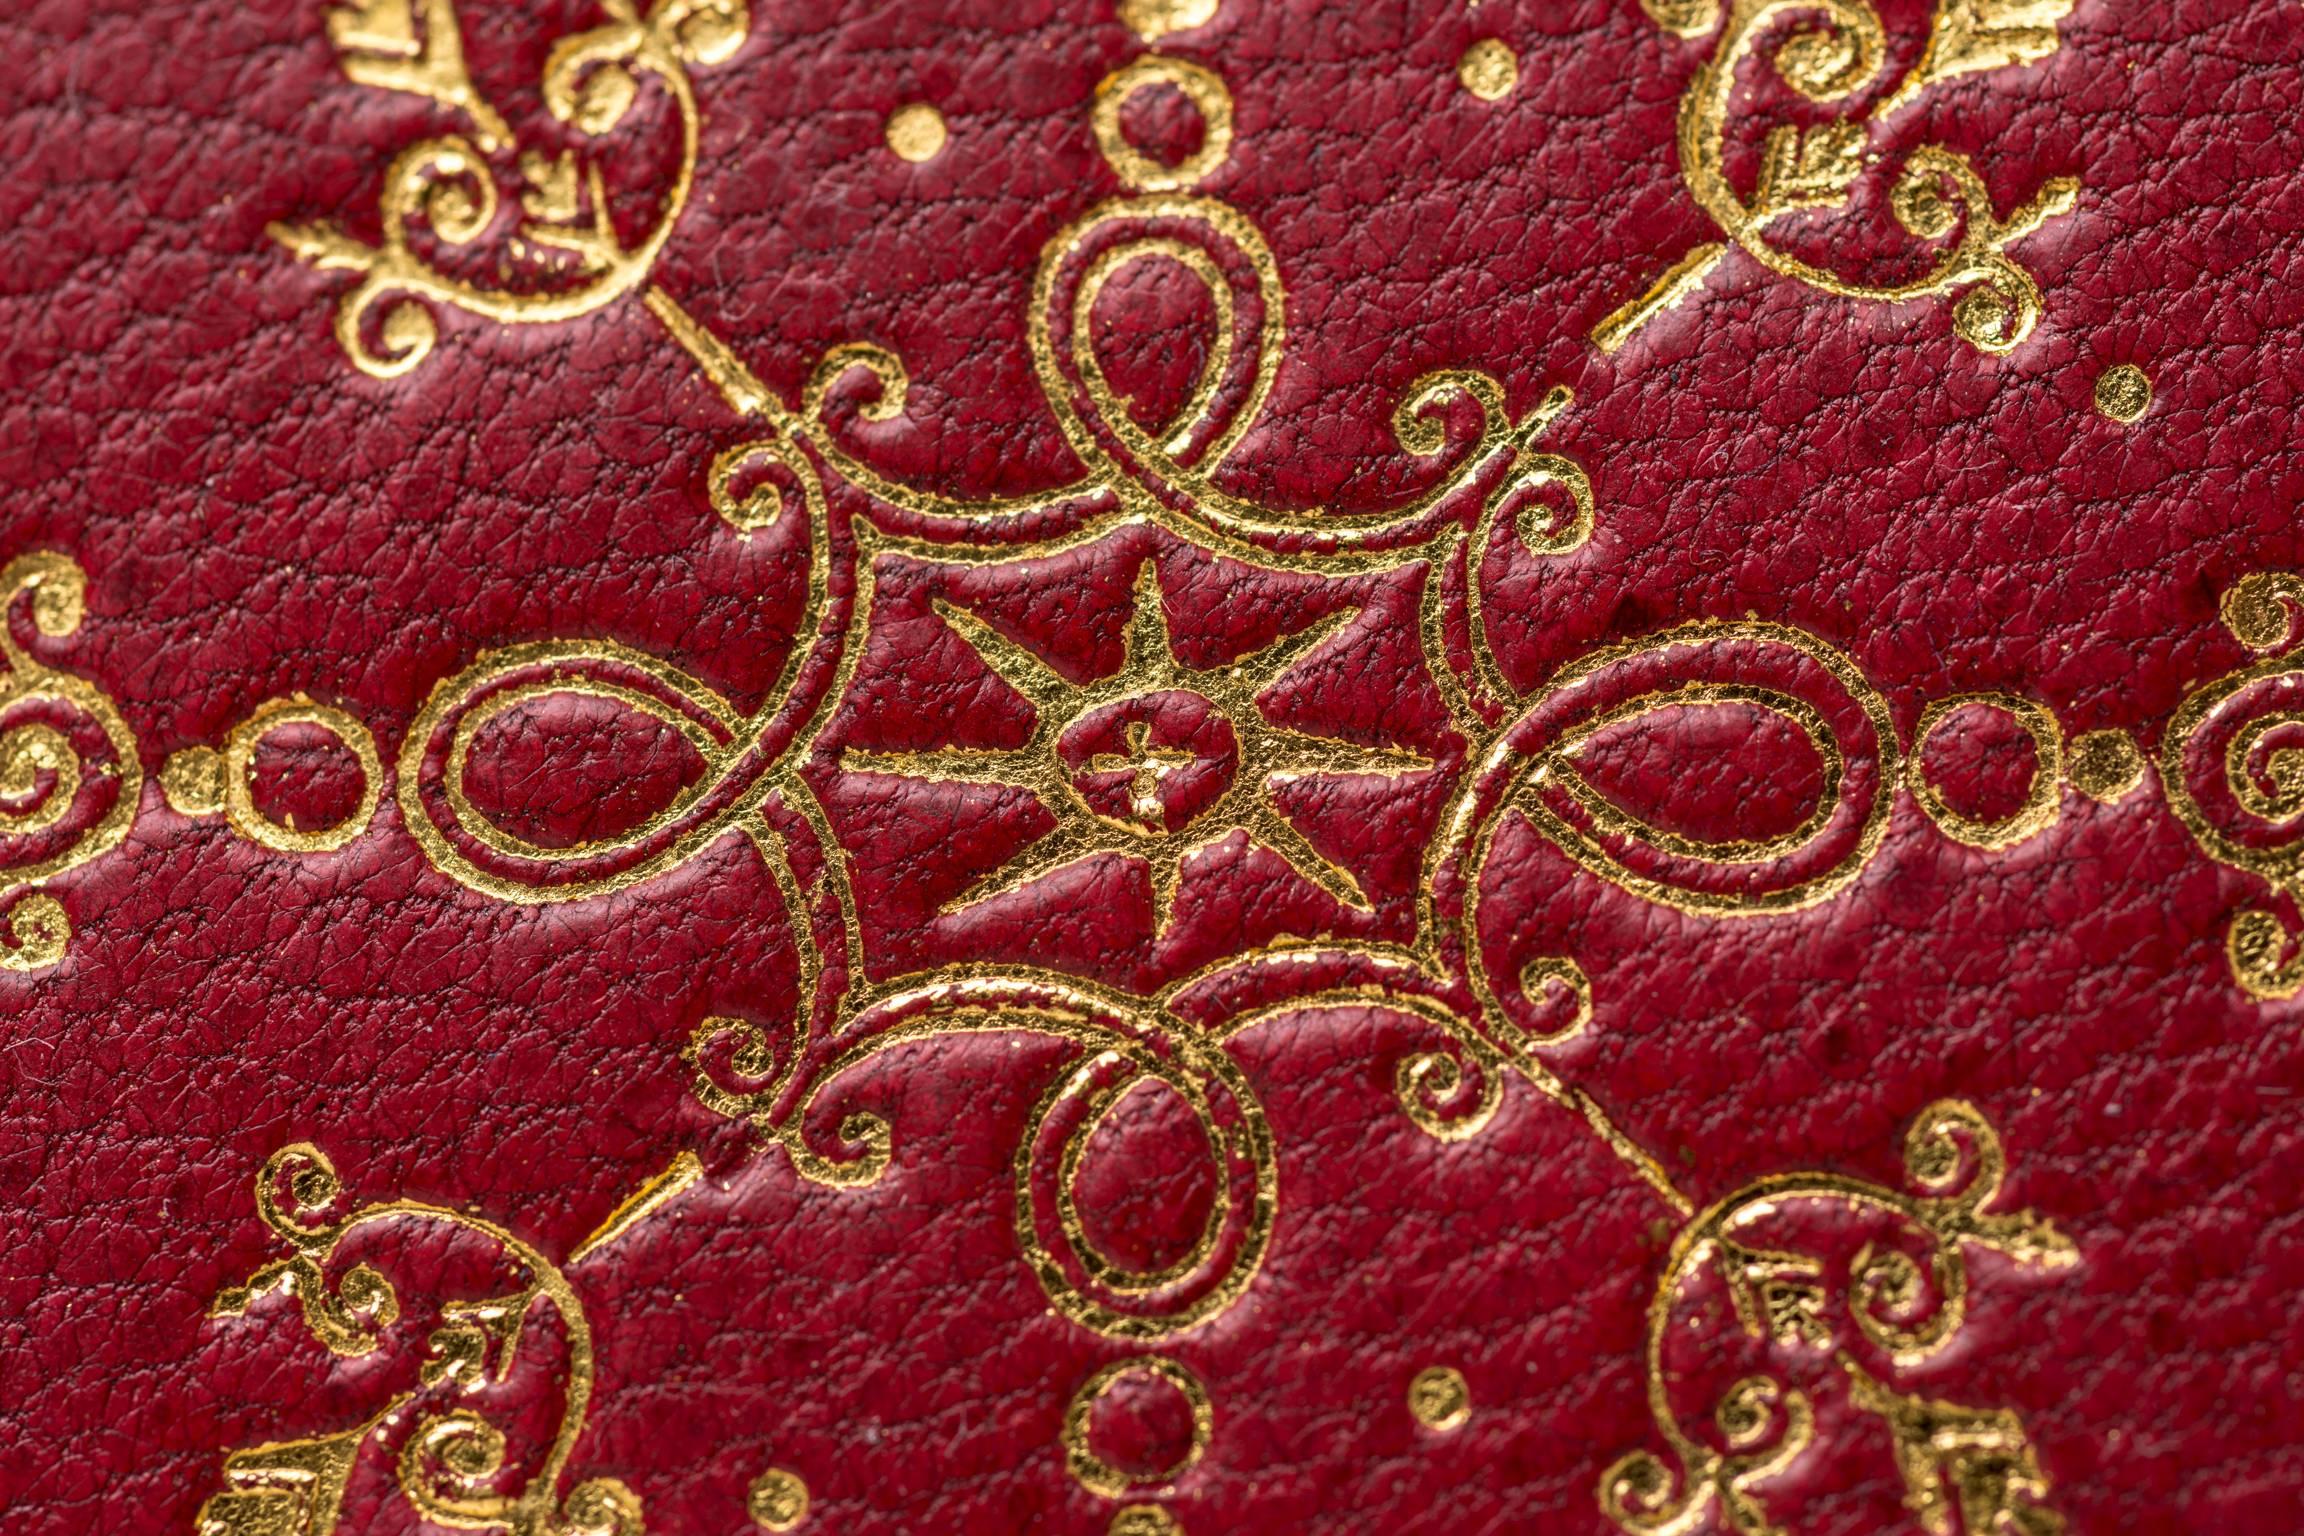 Women's Stanway. Red leather purse hand tooled with gold in eighteenth century style For Sale